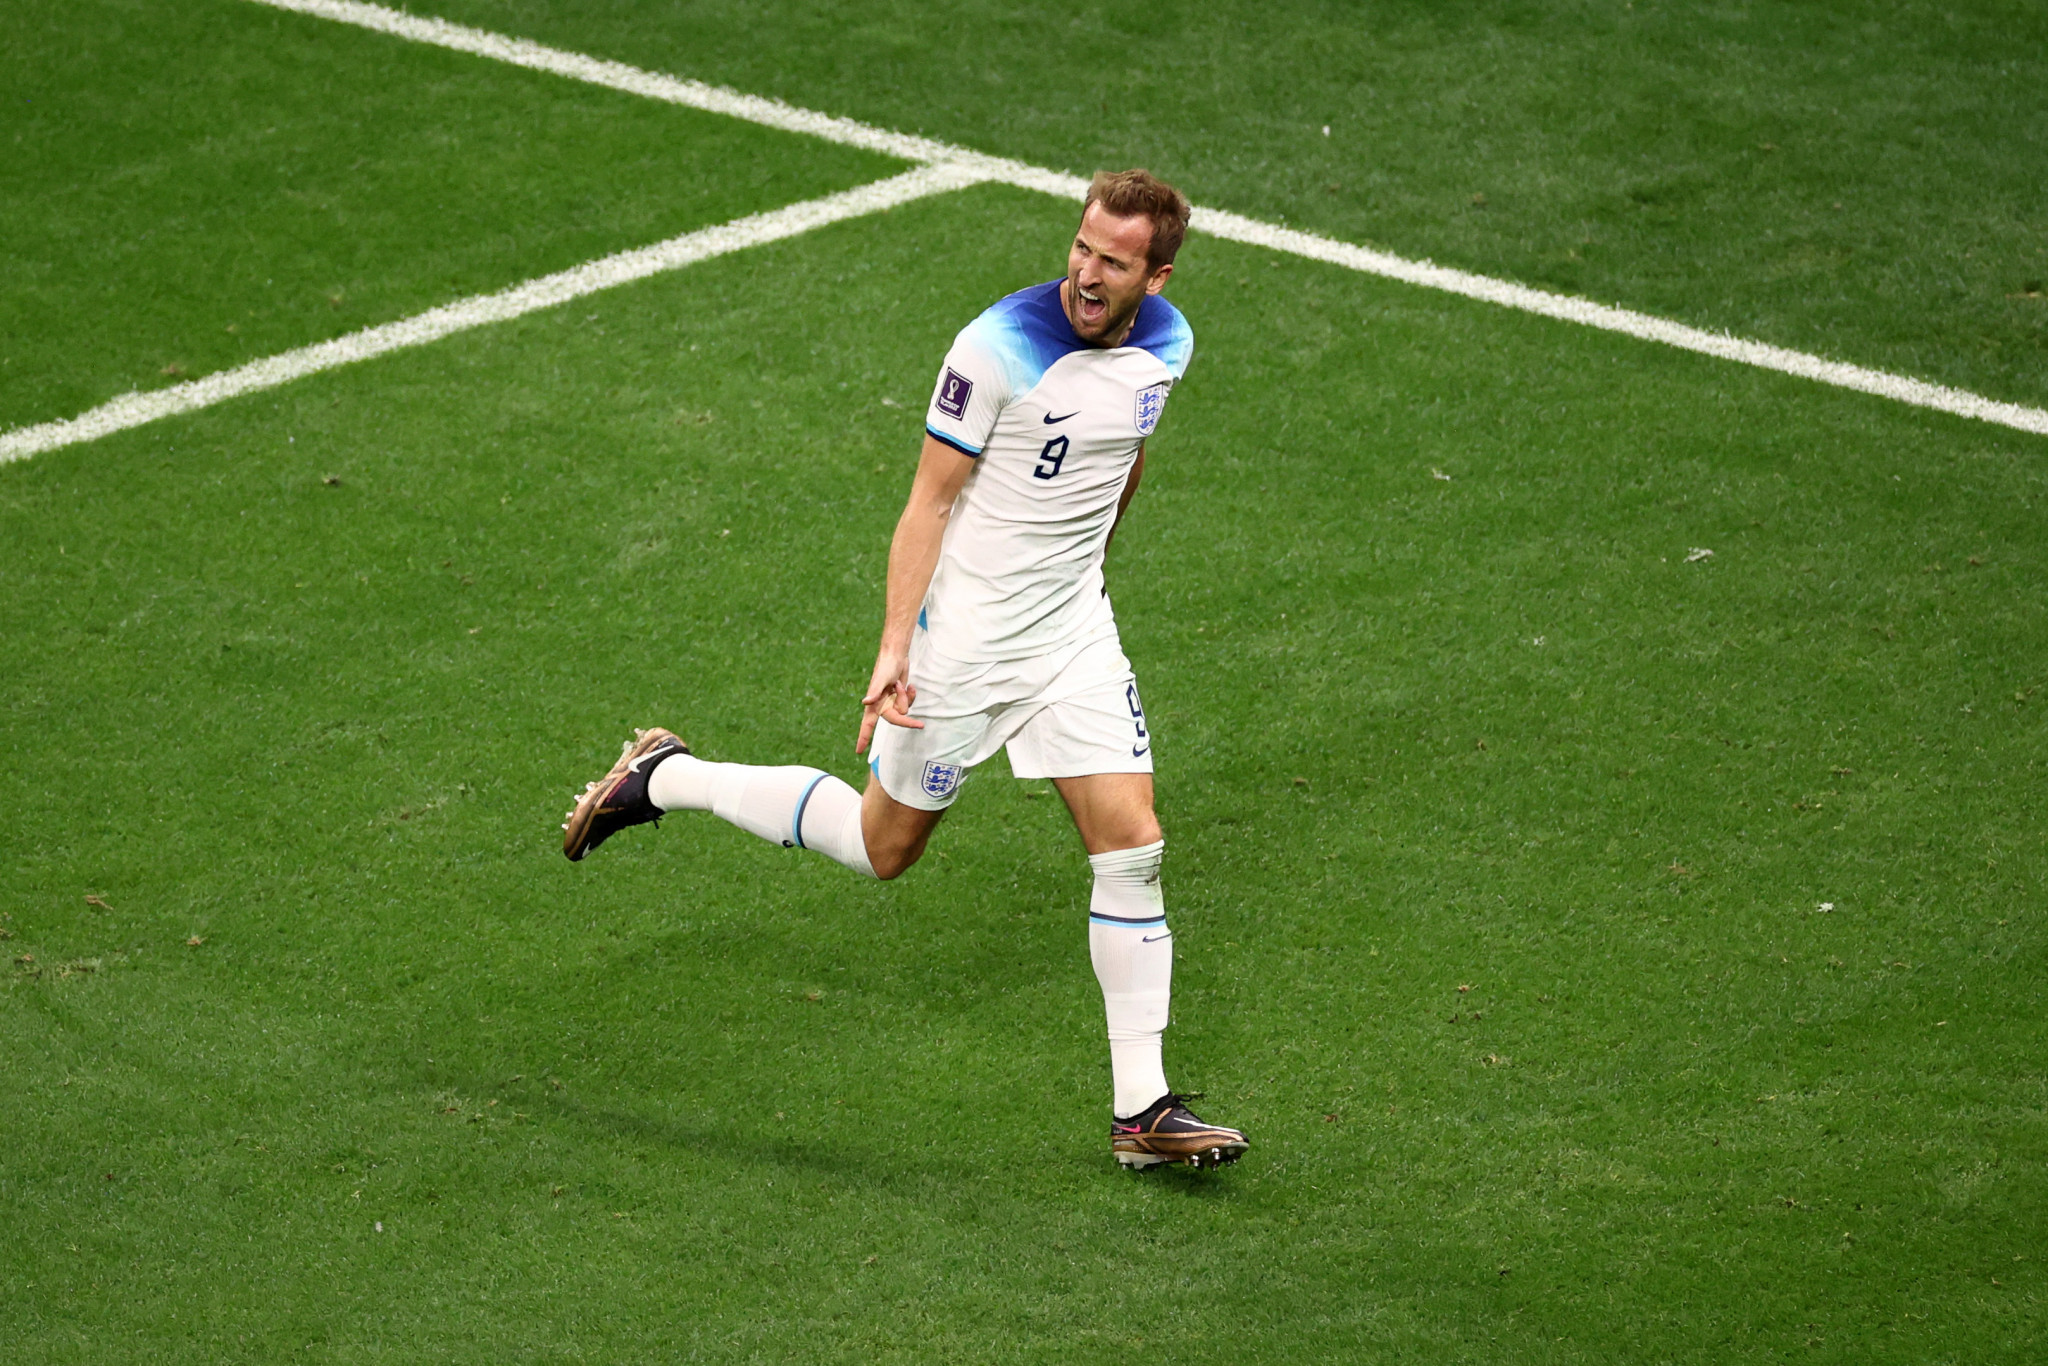 With today's goal, Harry Kane is one goal behind Wayne Rooney's all-time record of 53 England goals ©Getty Images

